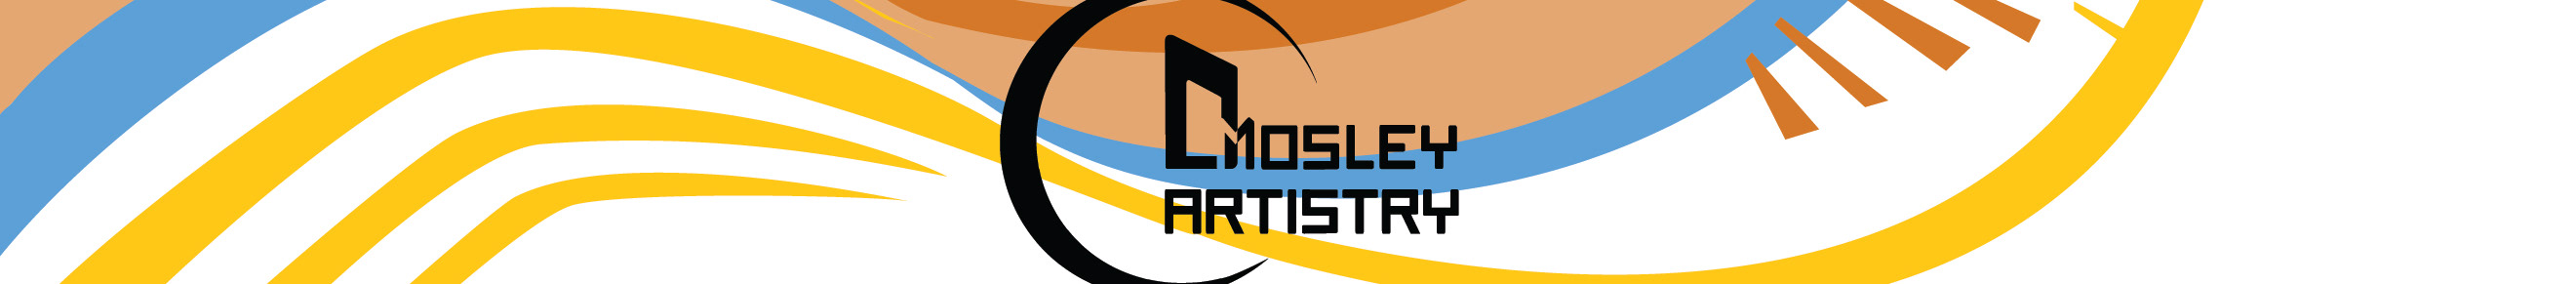 Diandre' Mosley's profile banner